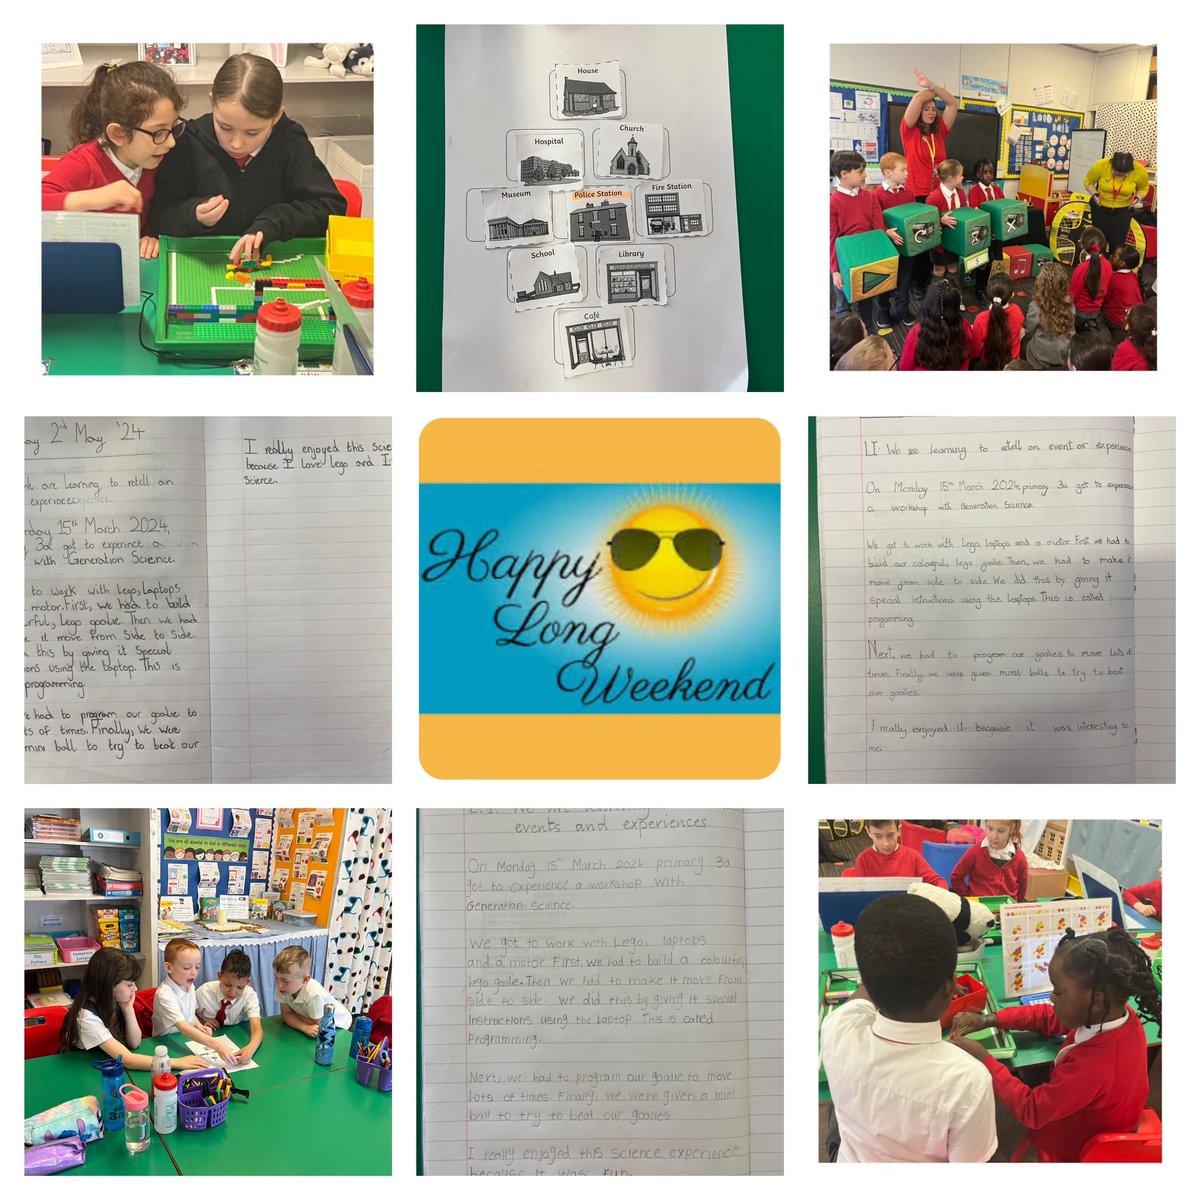 P3a are developing their oracy skills beautifully & group discussions during our Diamond9 activity about communities were excellent. The ideas & presentation of work during guided writing to introduce Recount were gorgeous. They even added their own personal sentences to finish!